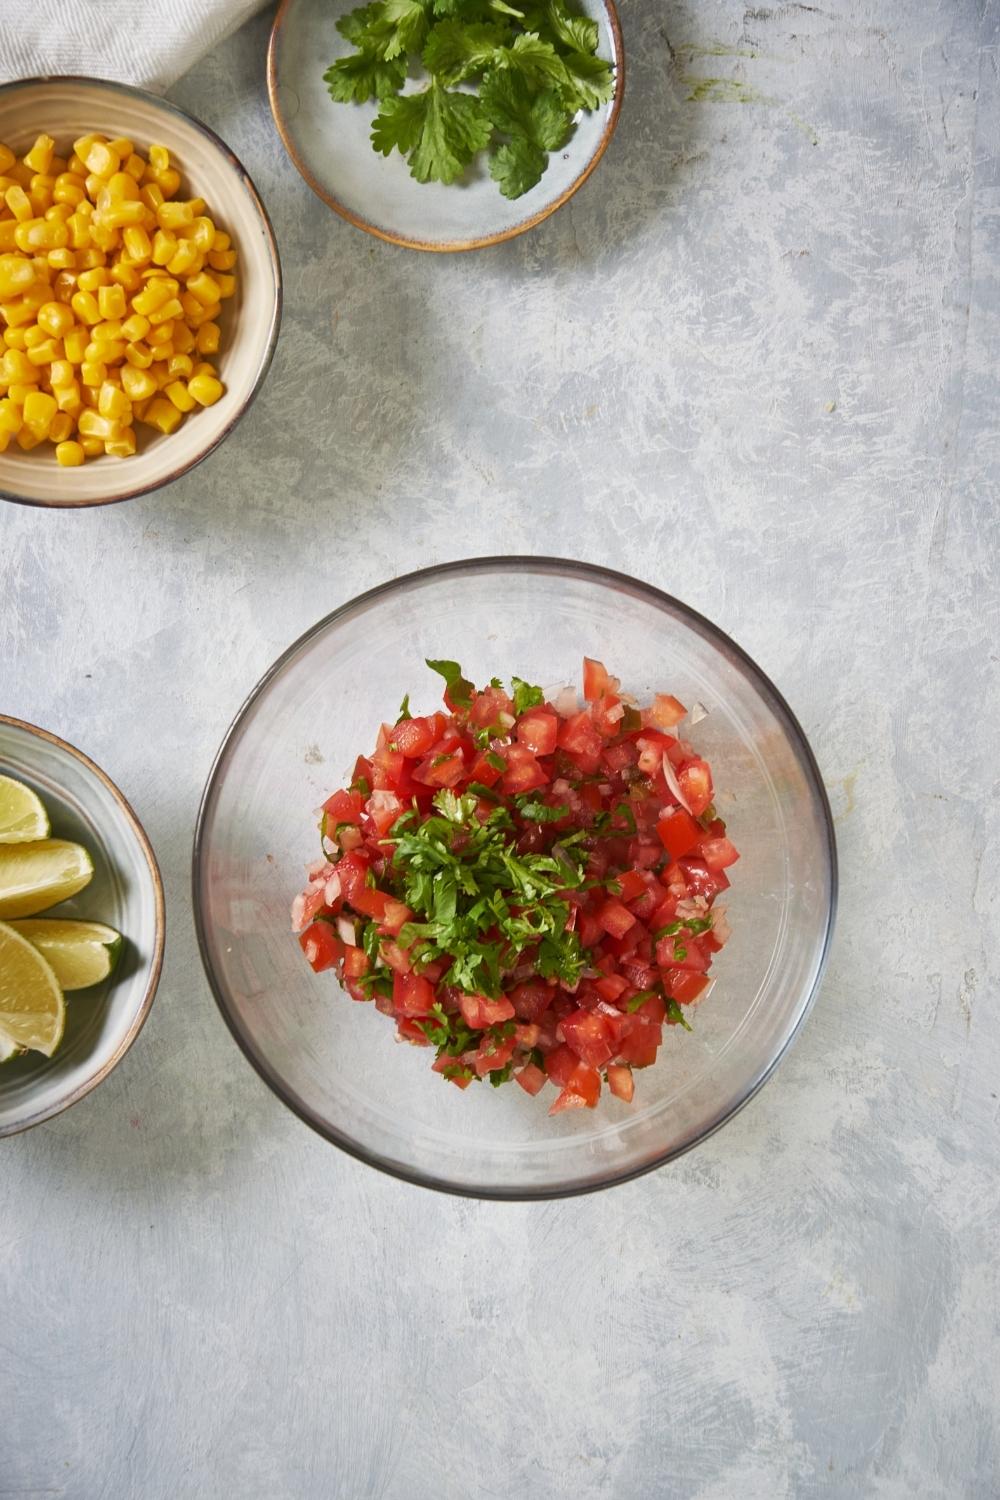 Clear bowl of pico de gallo ingredients on a grey counter next to bowls of corn, cilantro, and lime wedges.